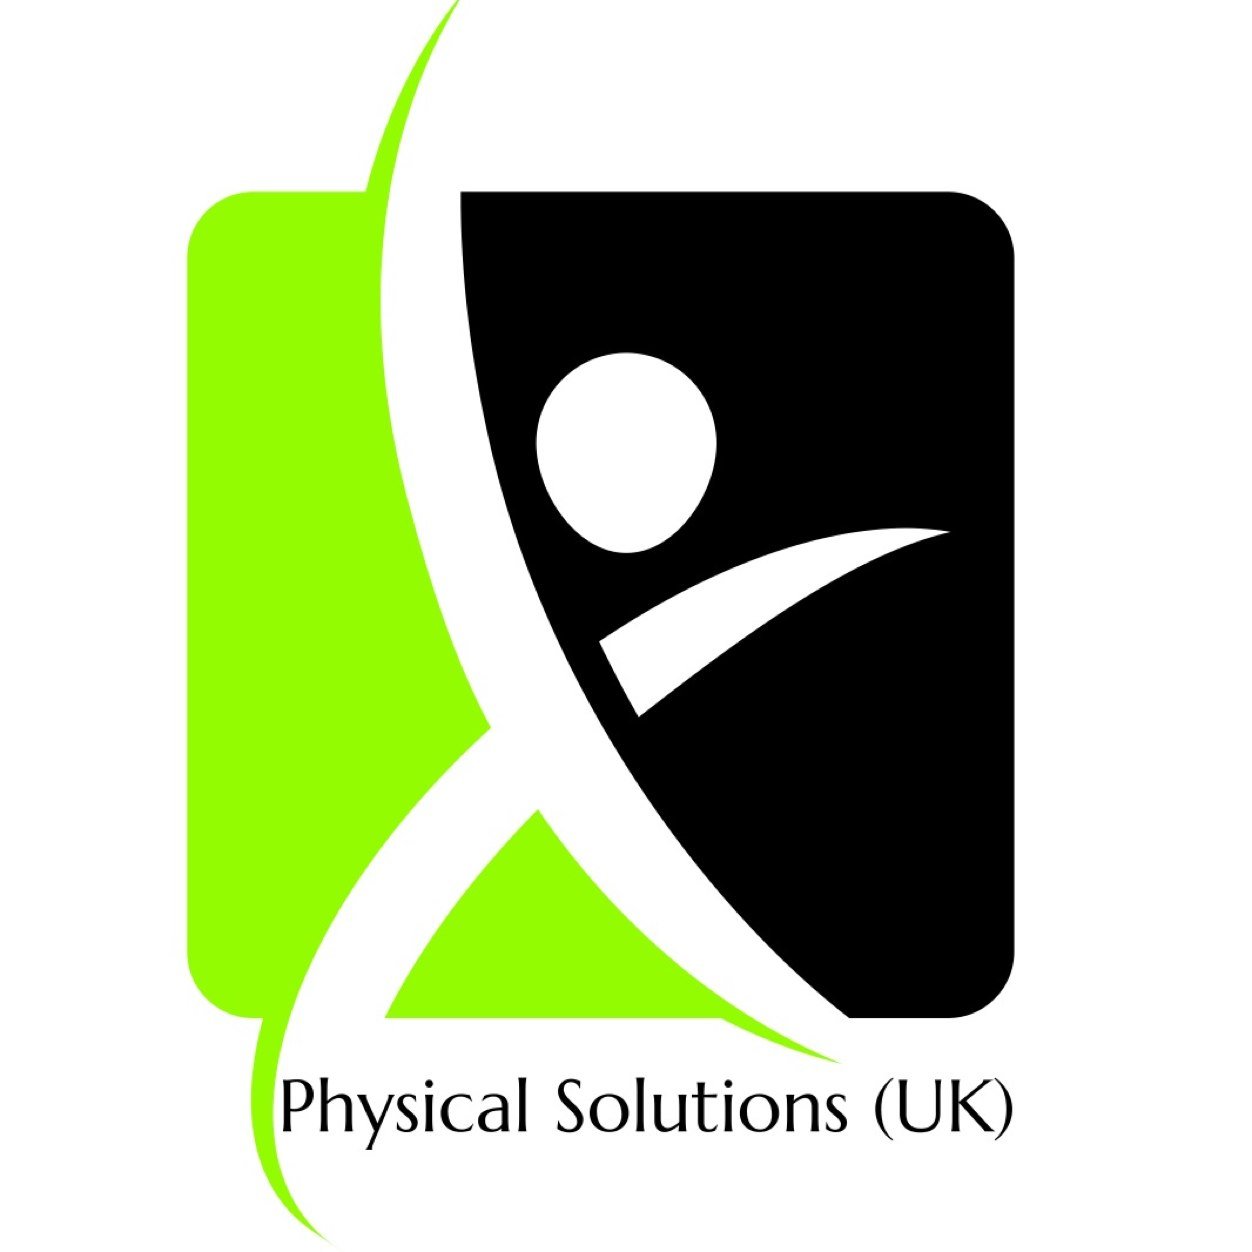 Physical Solutions (UK) Fitness Education Consultancy providing freelance IQA, Tutoring, Assessing, Mentoring and Qualifications for the Fitness Industry